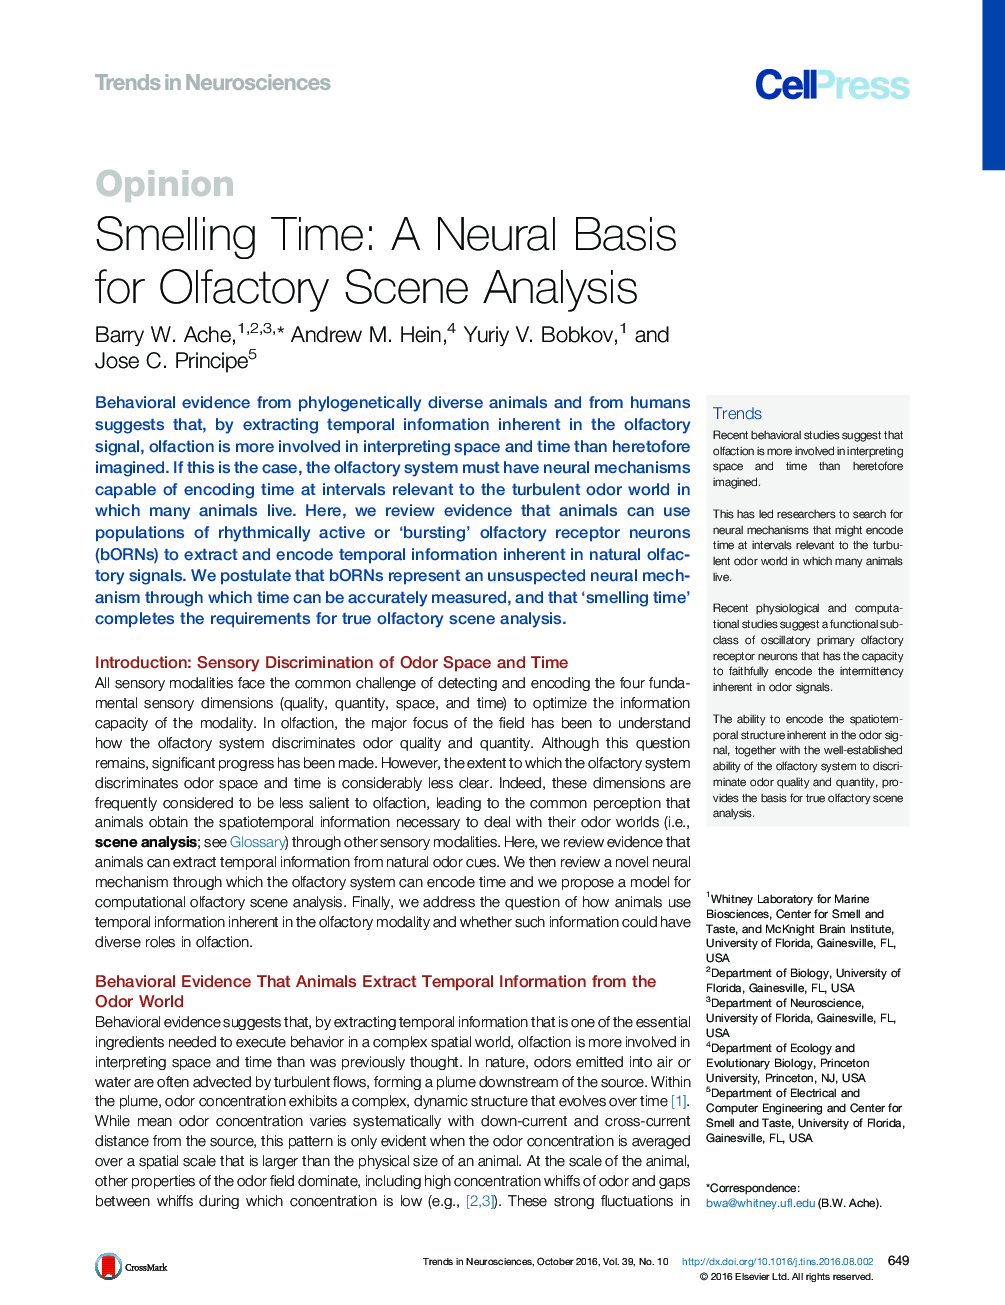 Smelling Time: A Neural Basis for Olfactory Scene Analysis